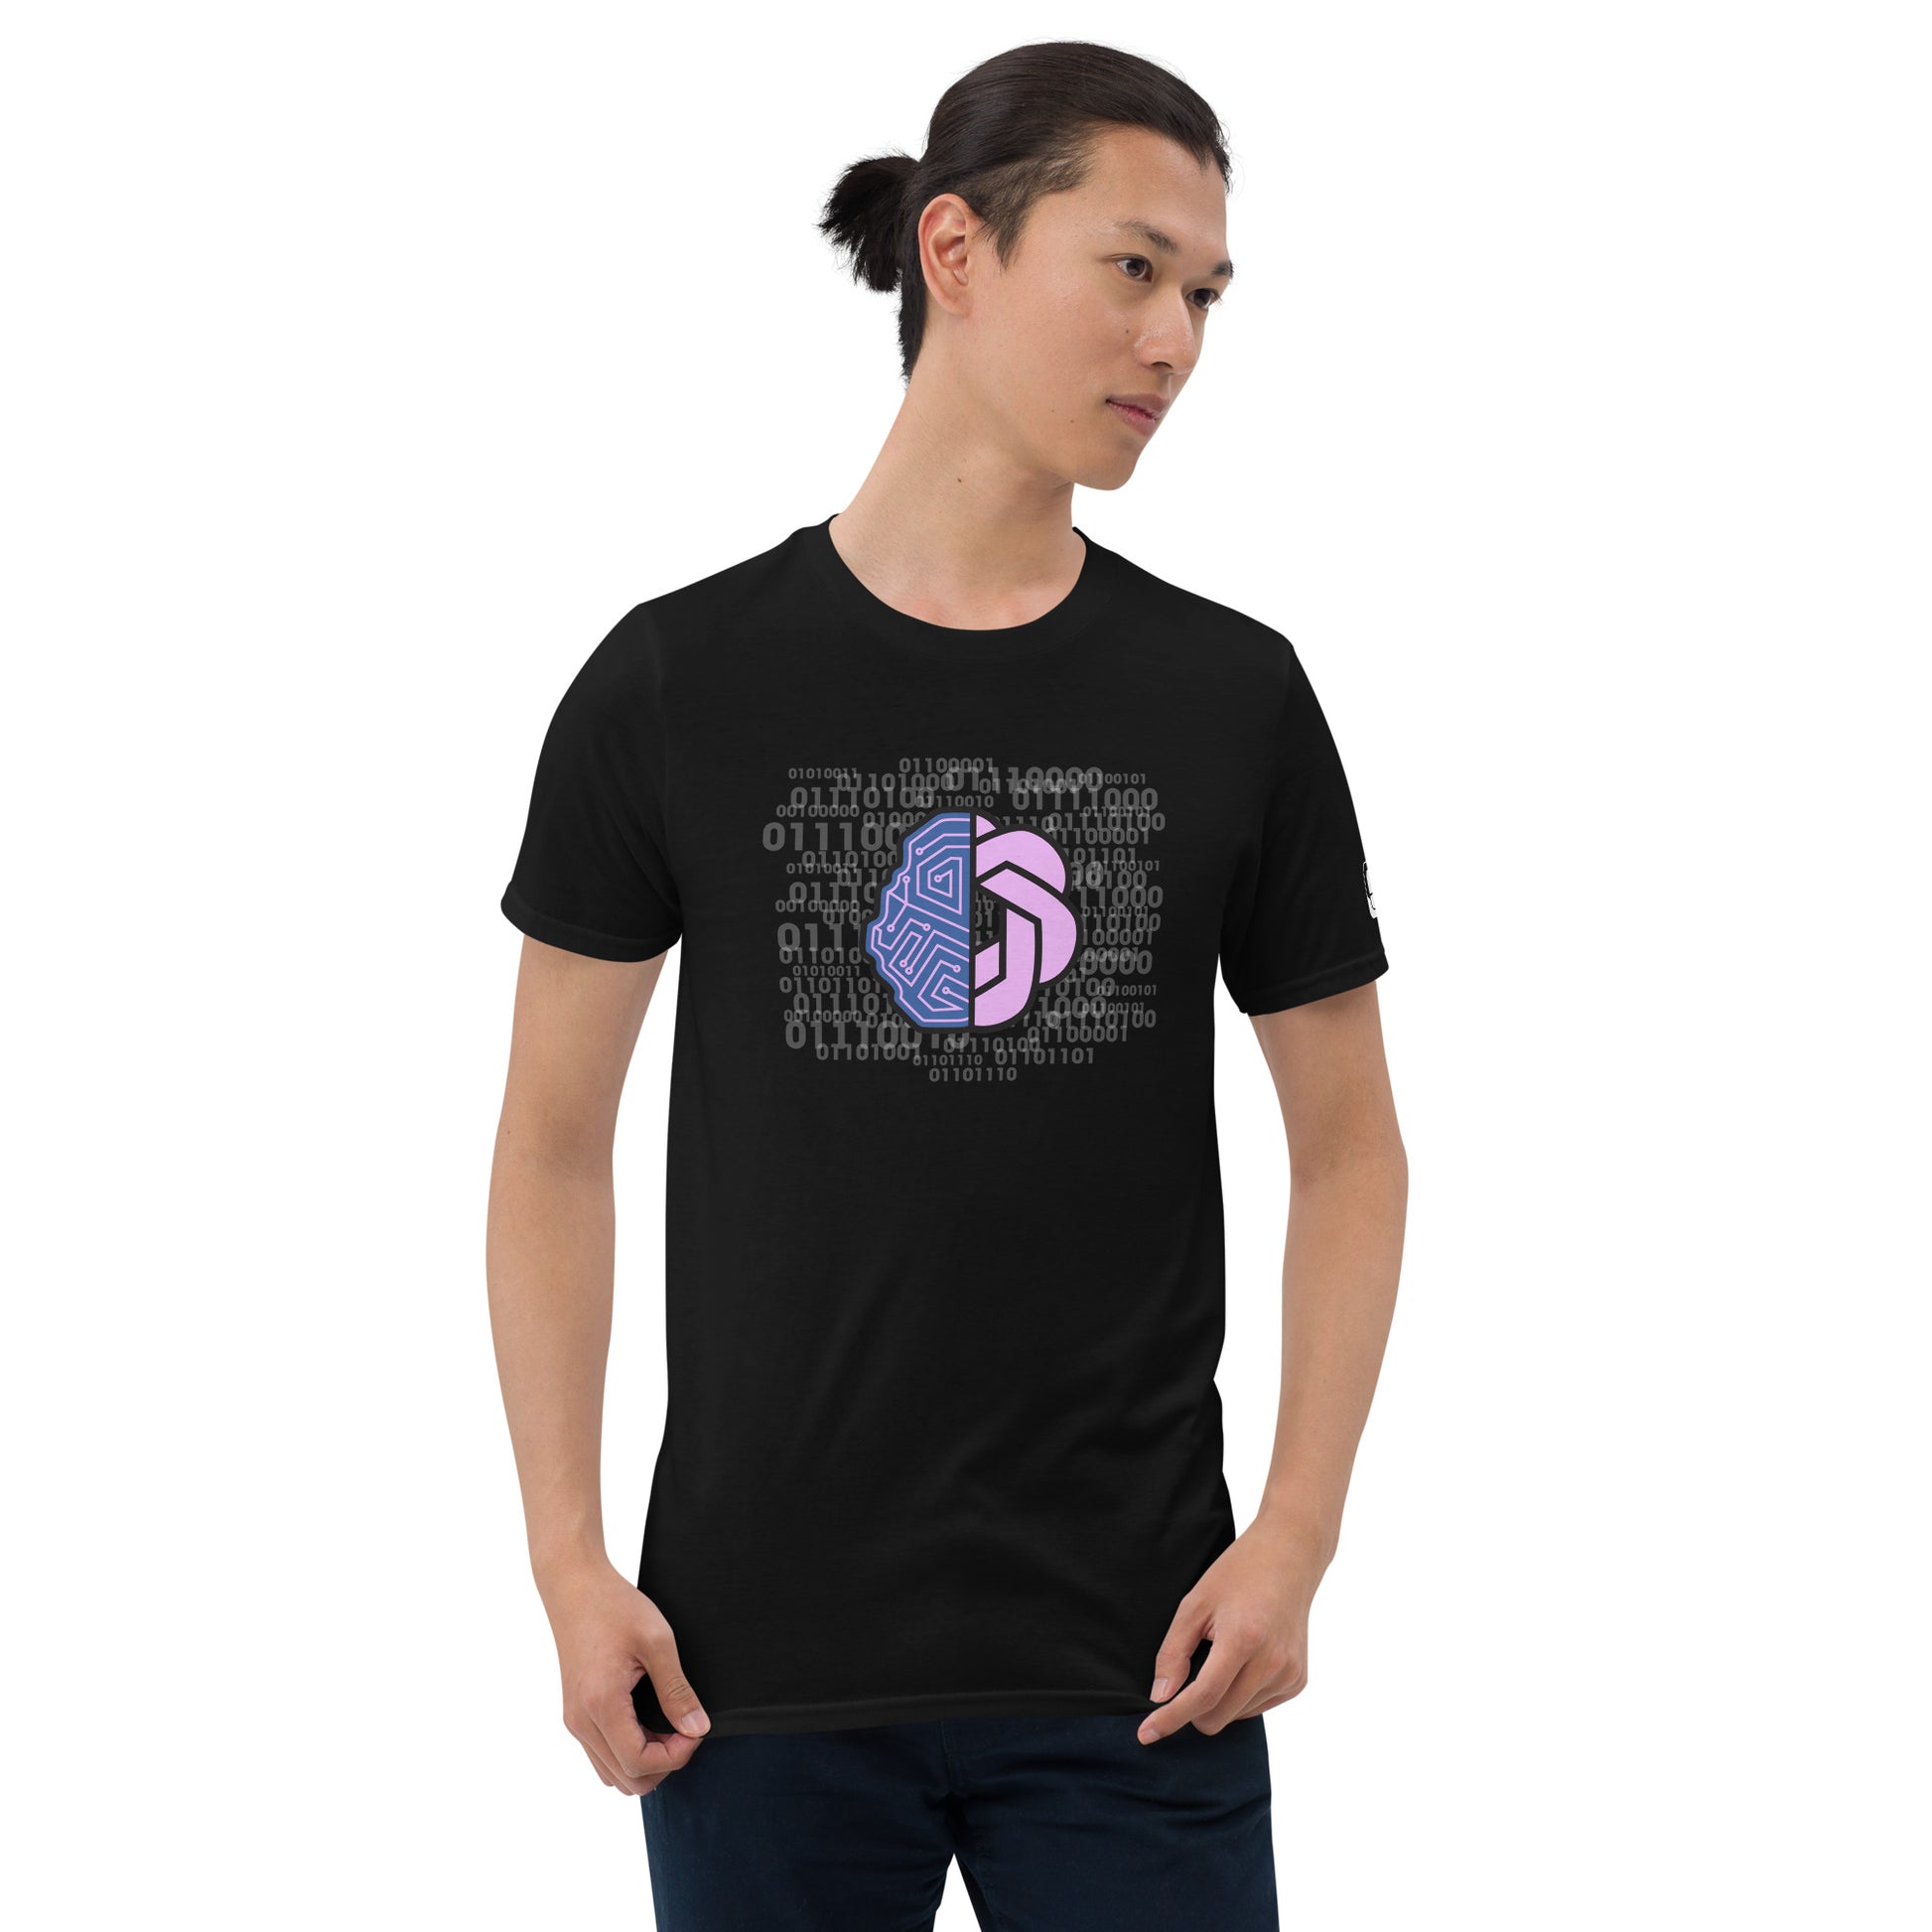 Serene young man with a ponytail wearing a black t-shirt with a central pink and purple geometric design surrounded by a matrix of binary code, complete with a logo tag on the sleeve, against a simple white background.